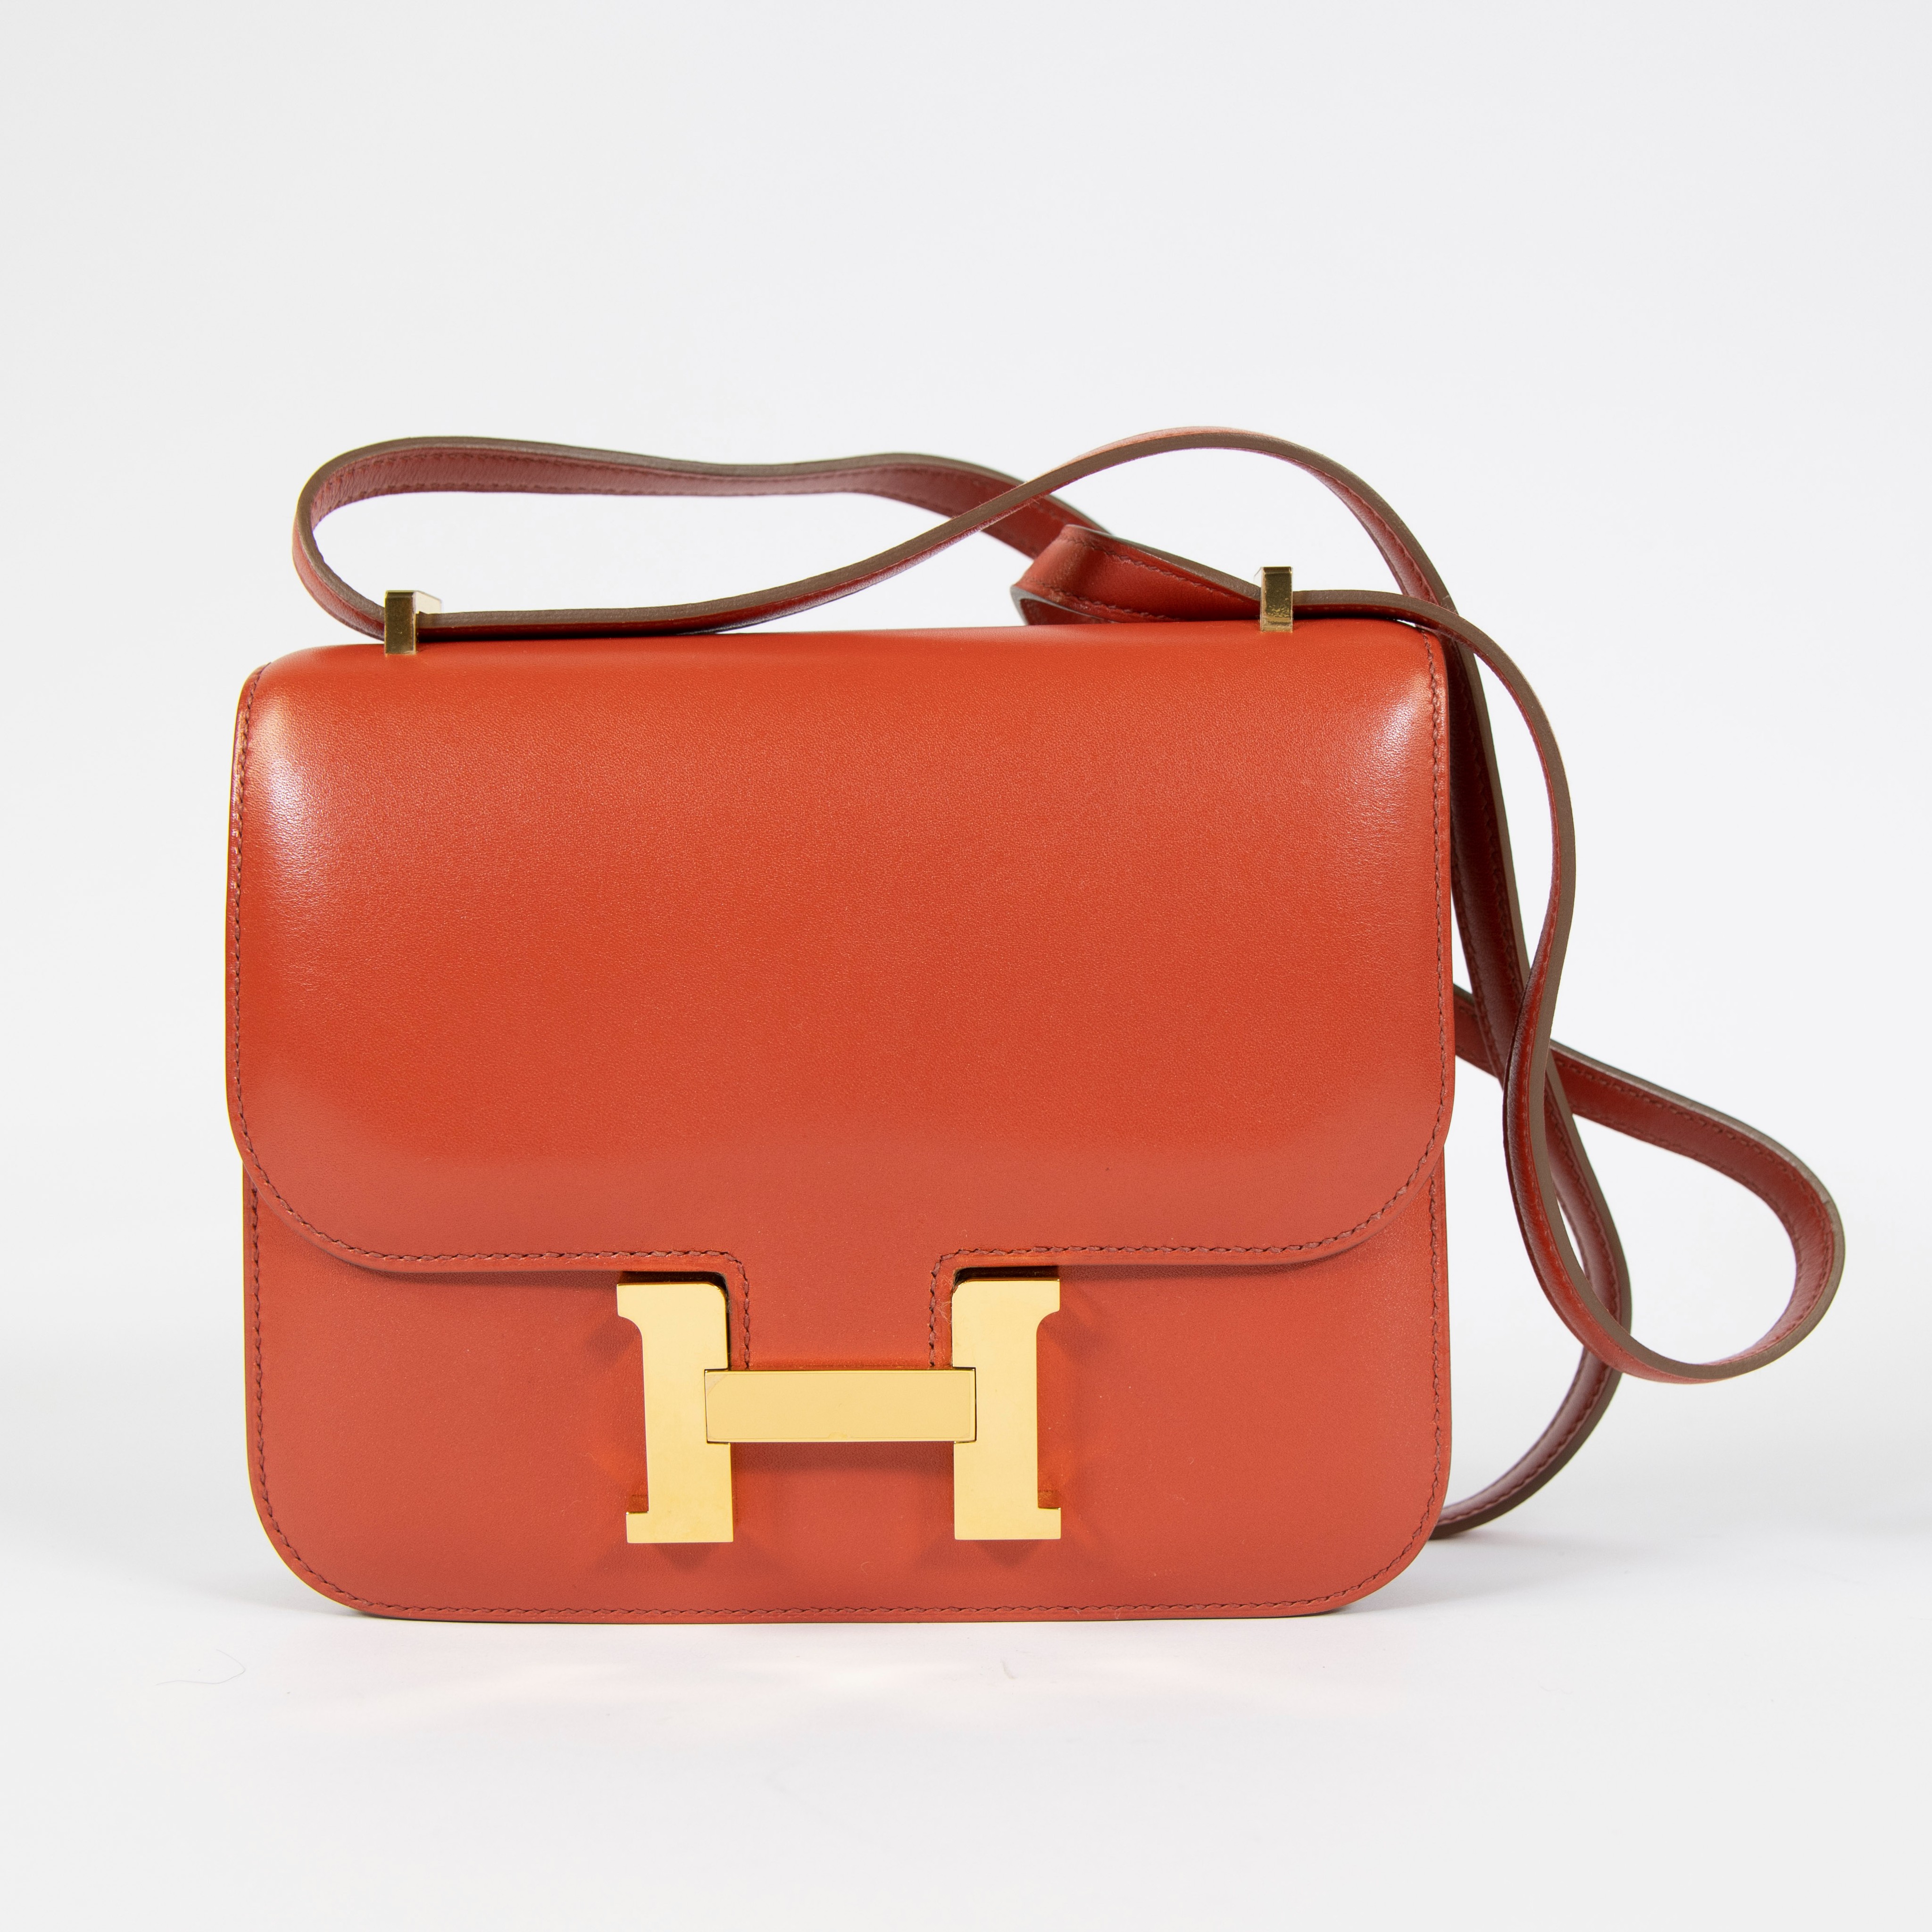 Hermes leather handback model Constance coral color with original bag and box - Image 2 of 9